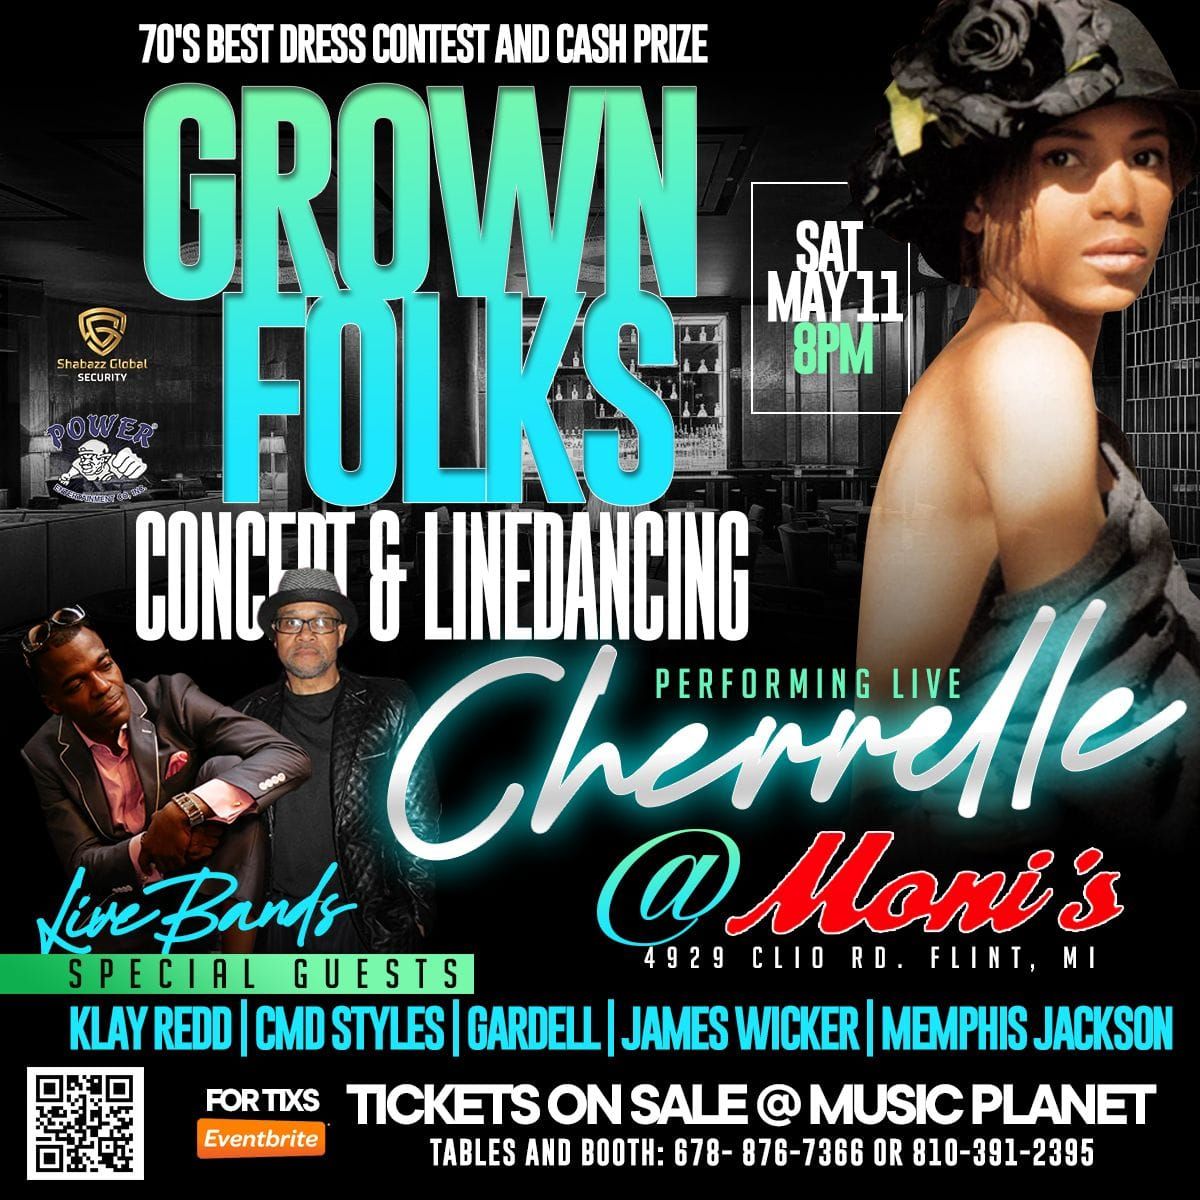 Power Records Grown Folks Party - Concert & Line - Dancing! 